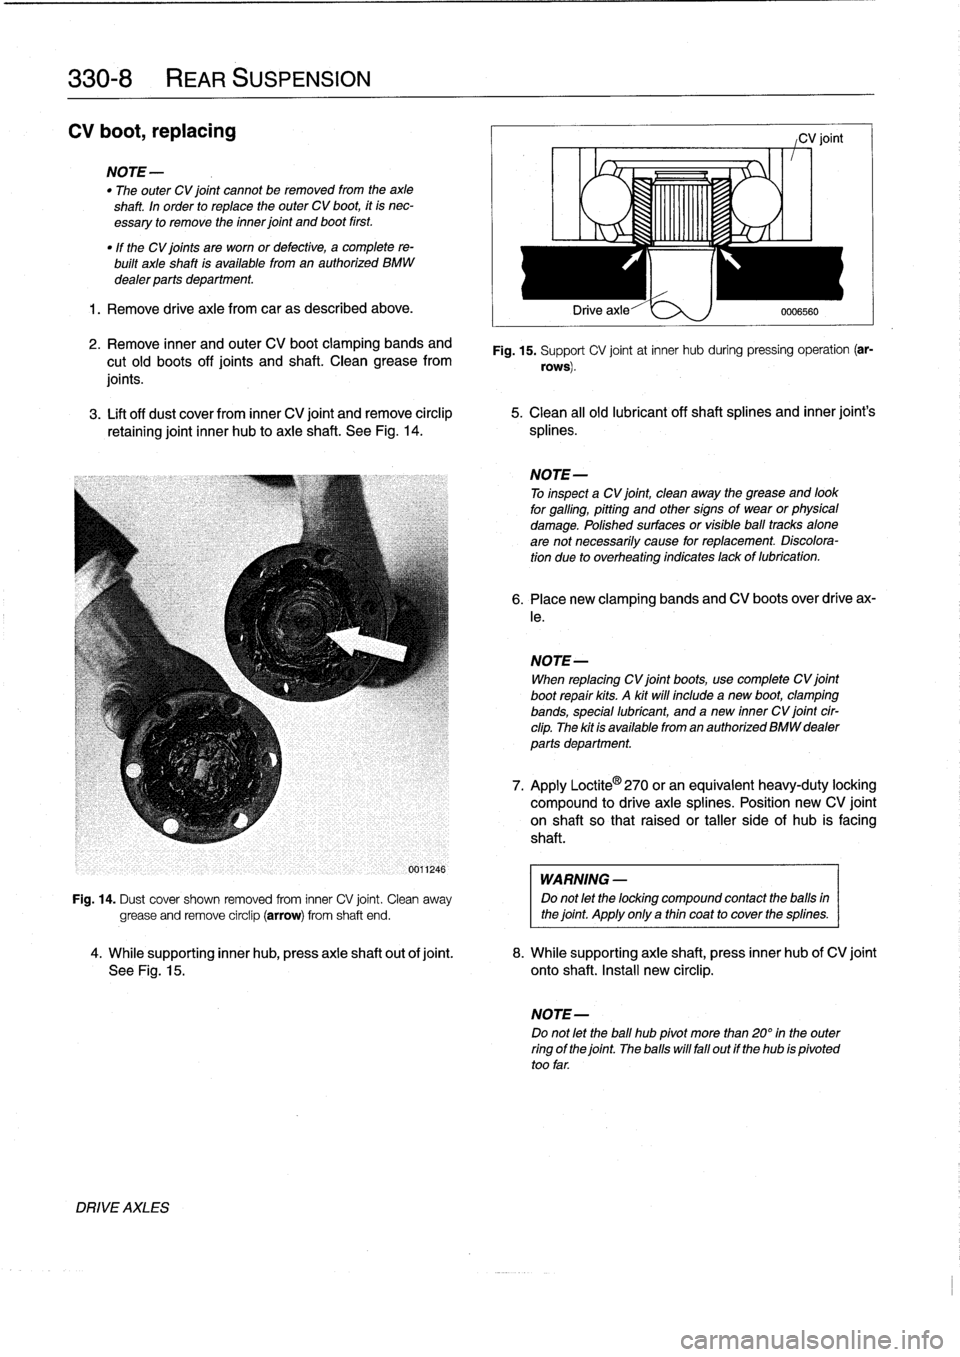 BMW M3 1993 E36 Owners Guide 
330-
8

	

REAR
SUSPENSION

CV
boot,
replacing

NOTE-

"
The
outer
CV
joint
cannot
be
removed
from
the
axle
shaft
.
In
order
to
replace
the
outer
CV
boot,
it
is
nec-
essary
to
remove
the
inner
joint
